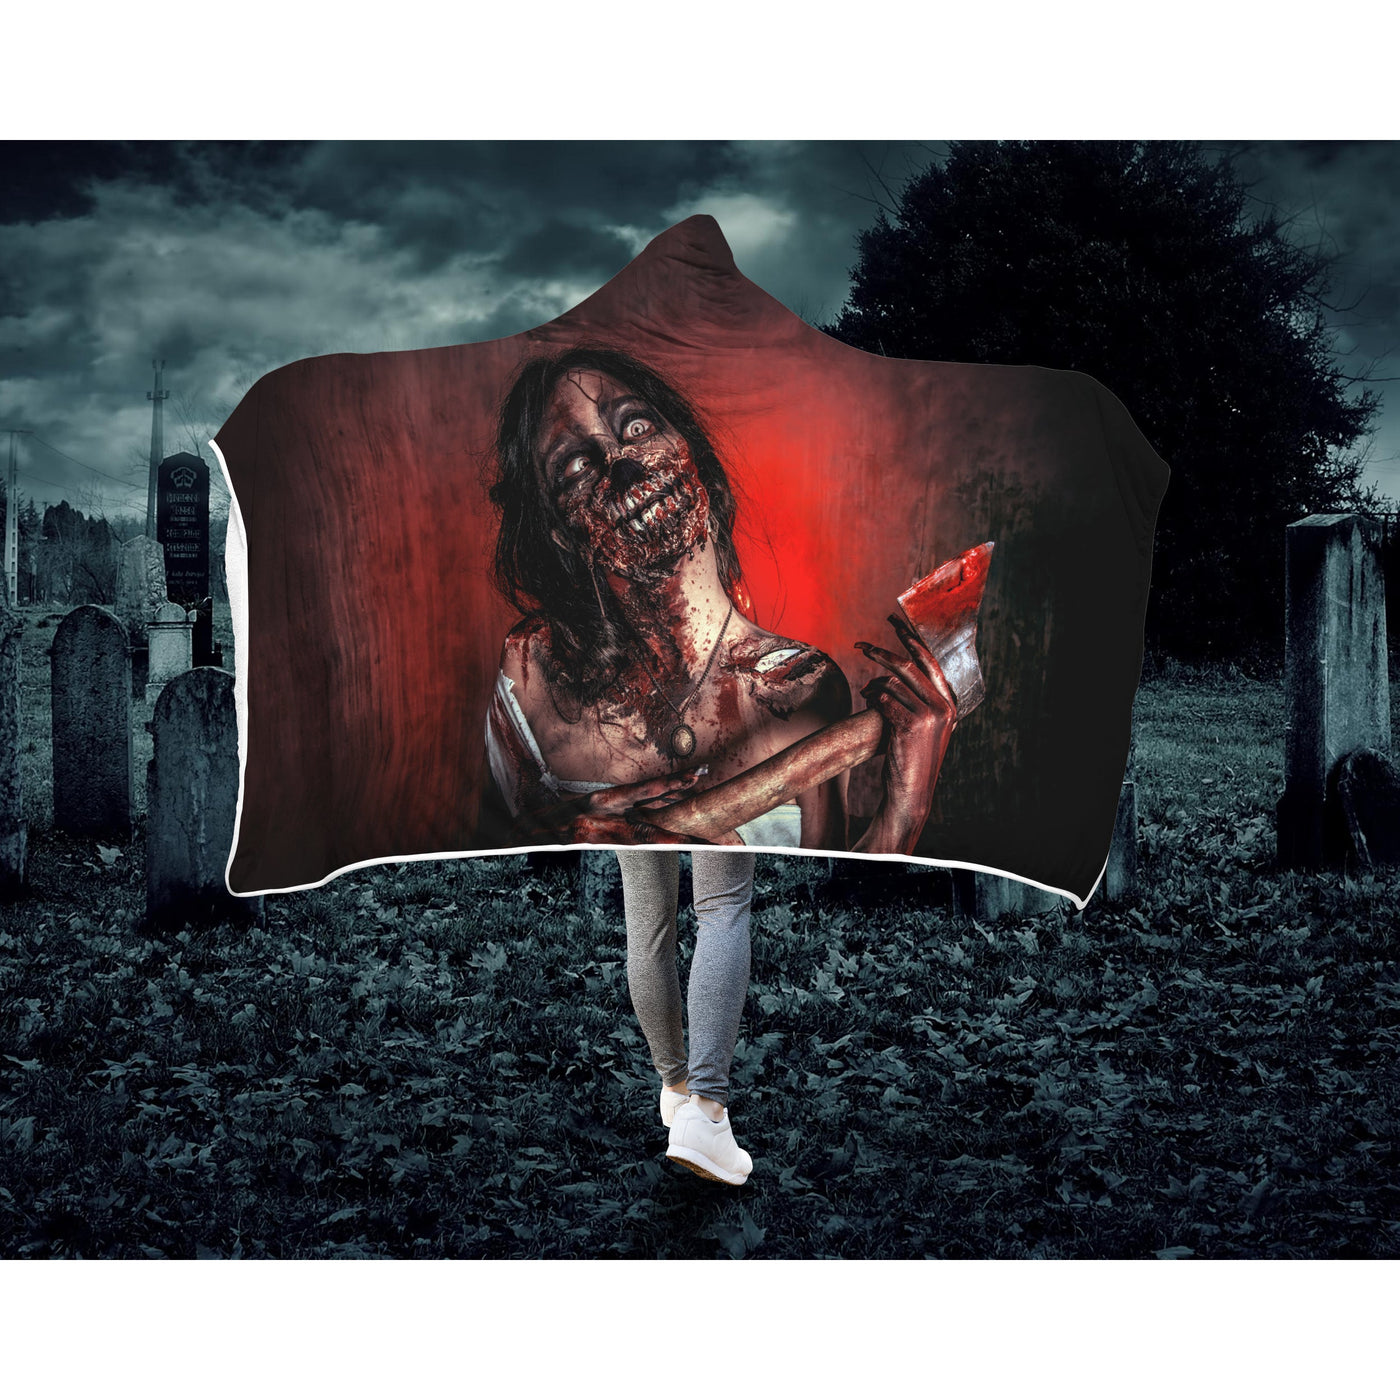 Black Horrorcore Menacing Zombie With An Ax | Hooded Blanket